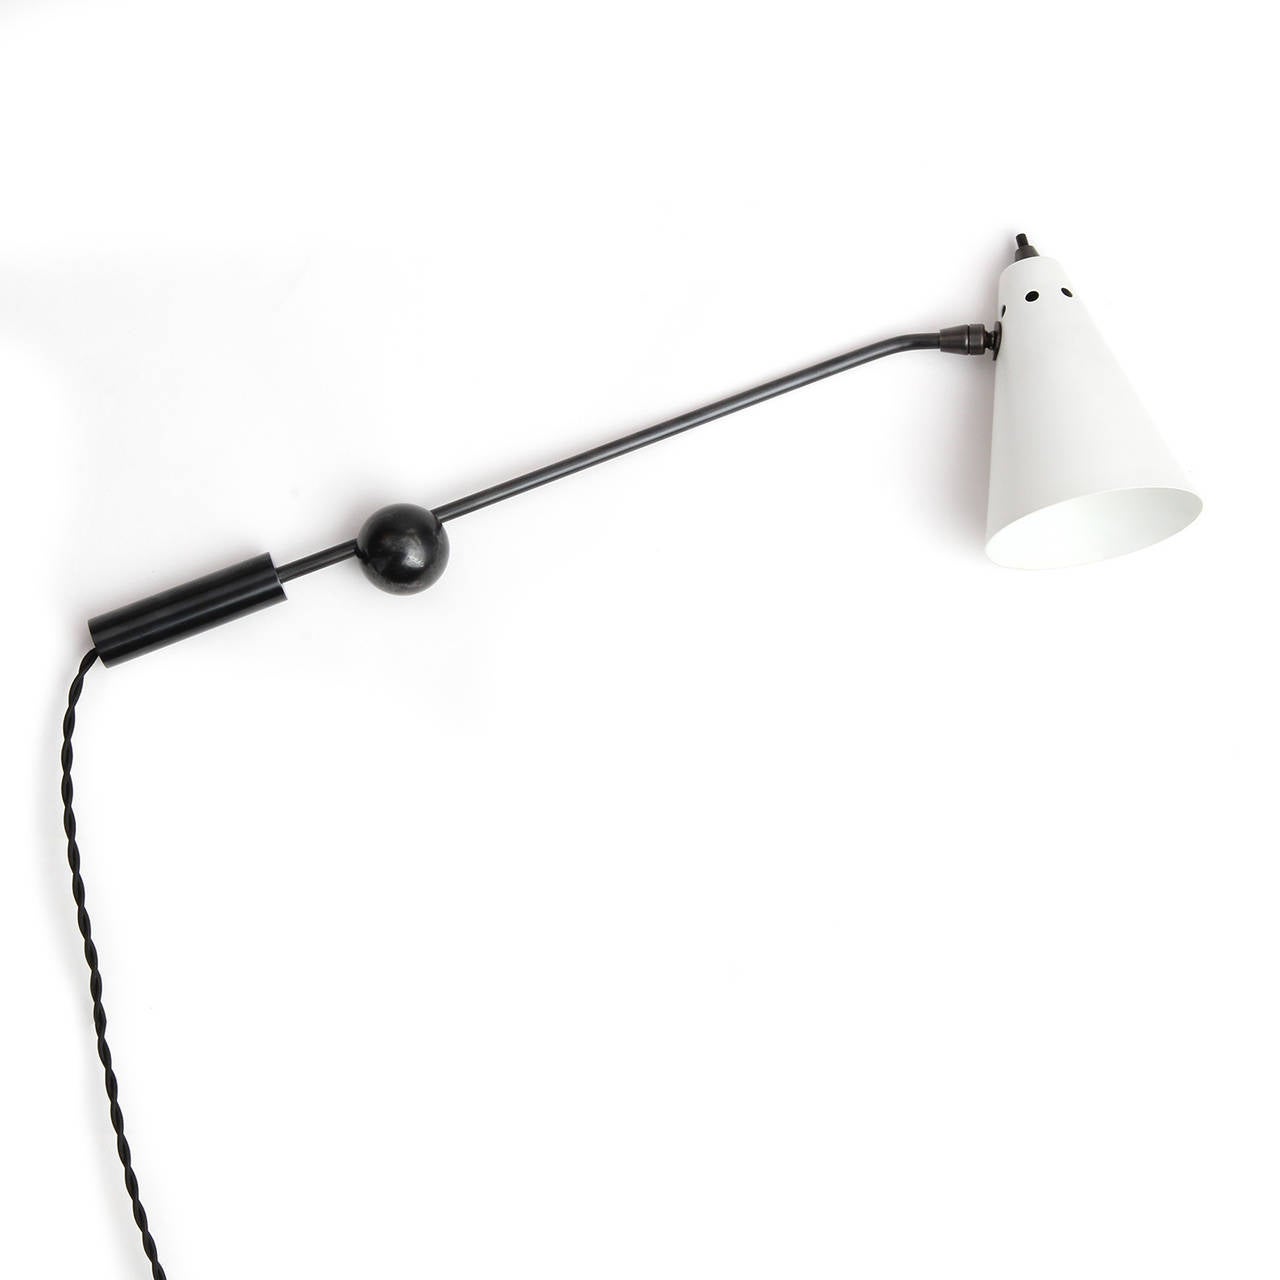 An innovative, uncommon and spare pair of wall lamps having chromed arms with adjustable lacquered conical shades. The arms are attached to circular patinated steel mounting plates by means of a magnetic ball and socket connection, allowing for a